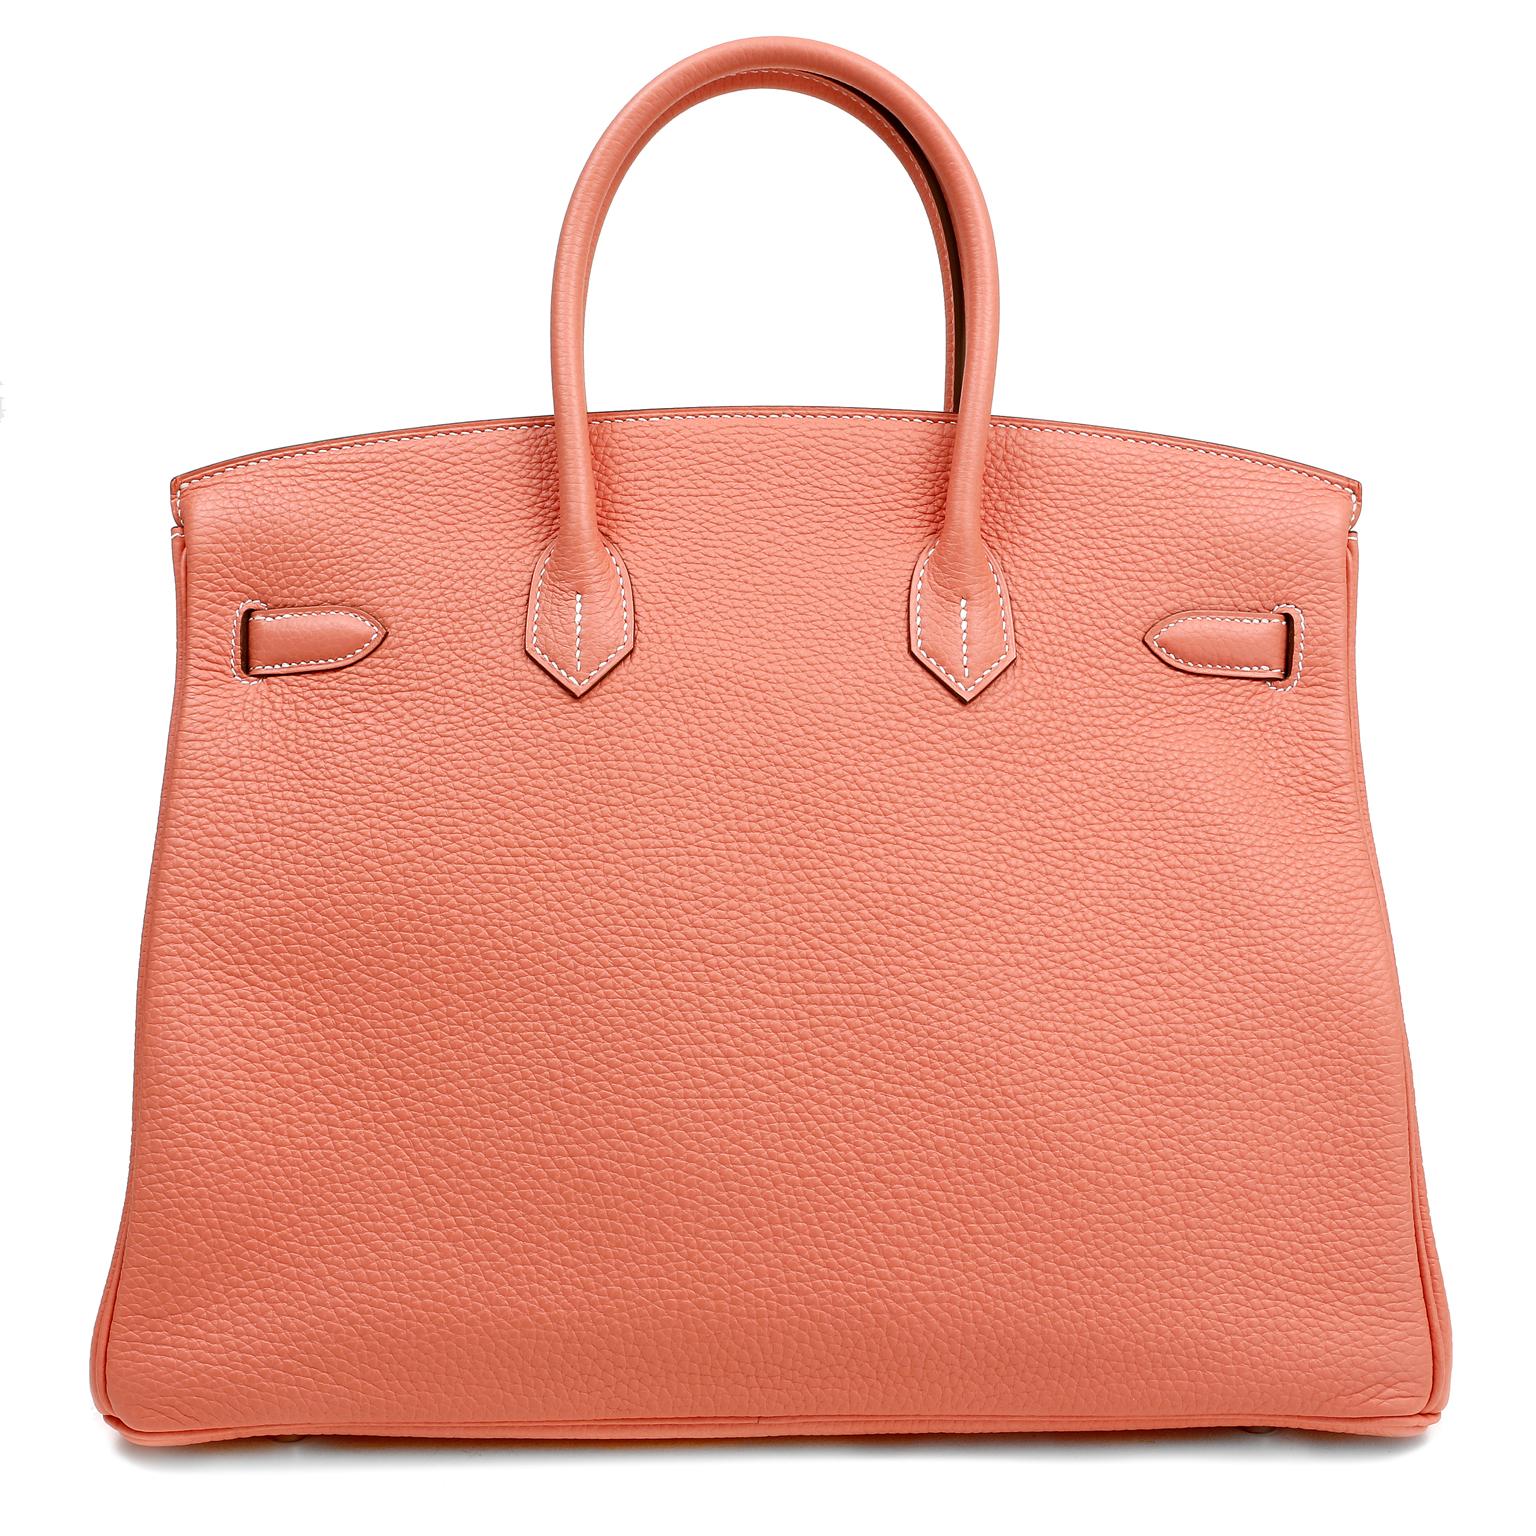 This authentic Hermès Crevette Togo 35 cm Birkin is in pristine unworn condition; the protective plastic is still intact on the hardware.  Hermès bags are considered the ultimate luxury item the world over.  Hand stitched by skilled craftsmen, wait